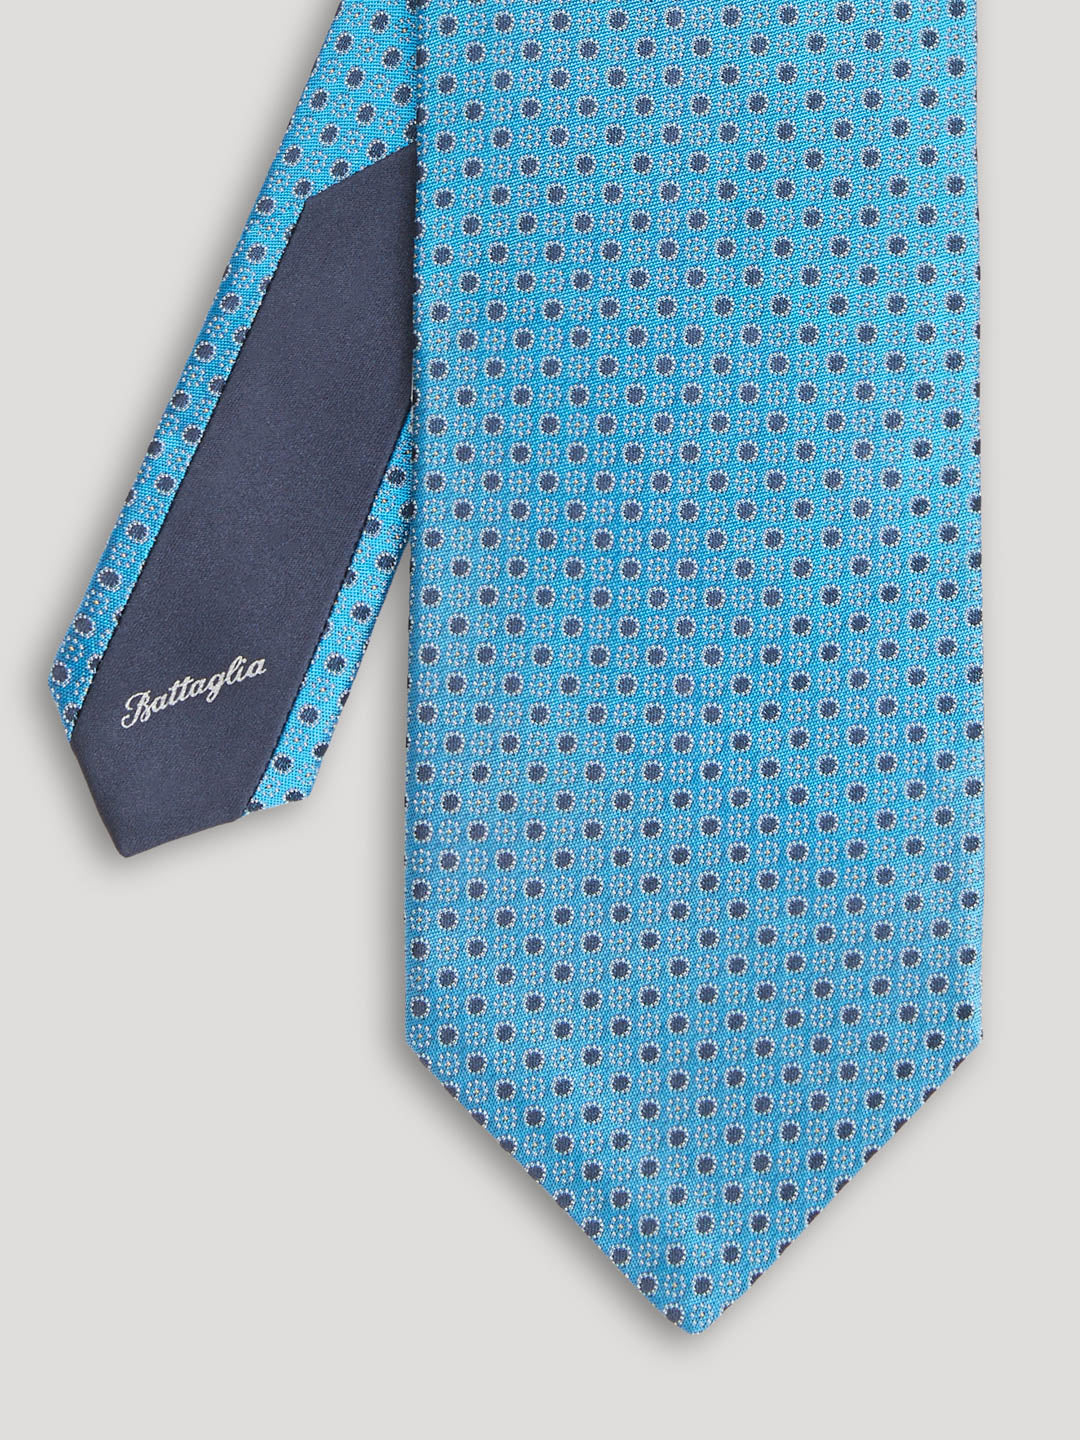 Blue tie with navy polkadots. 